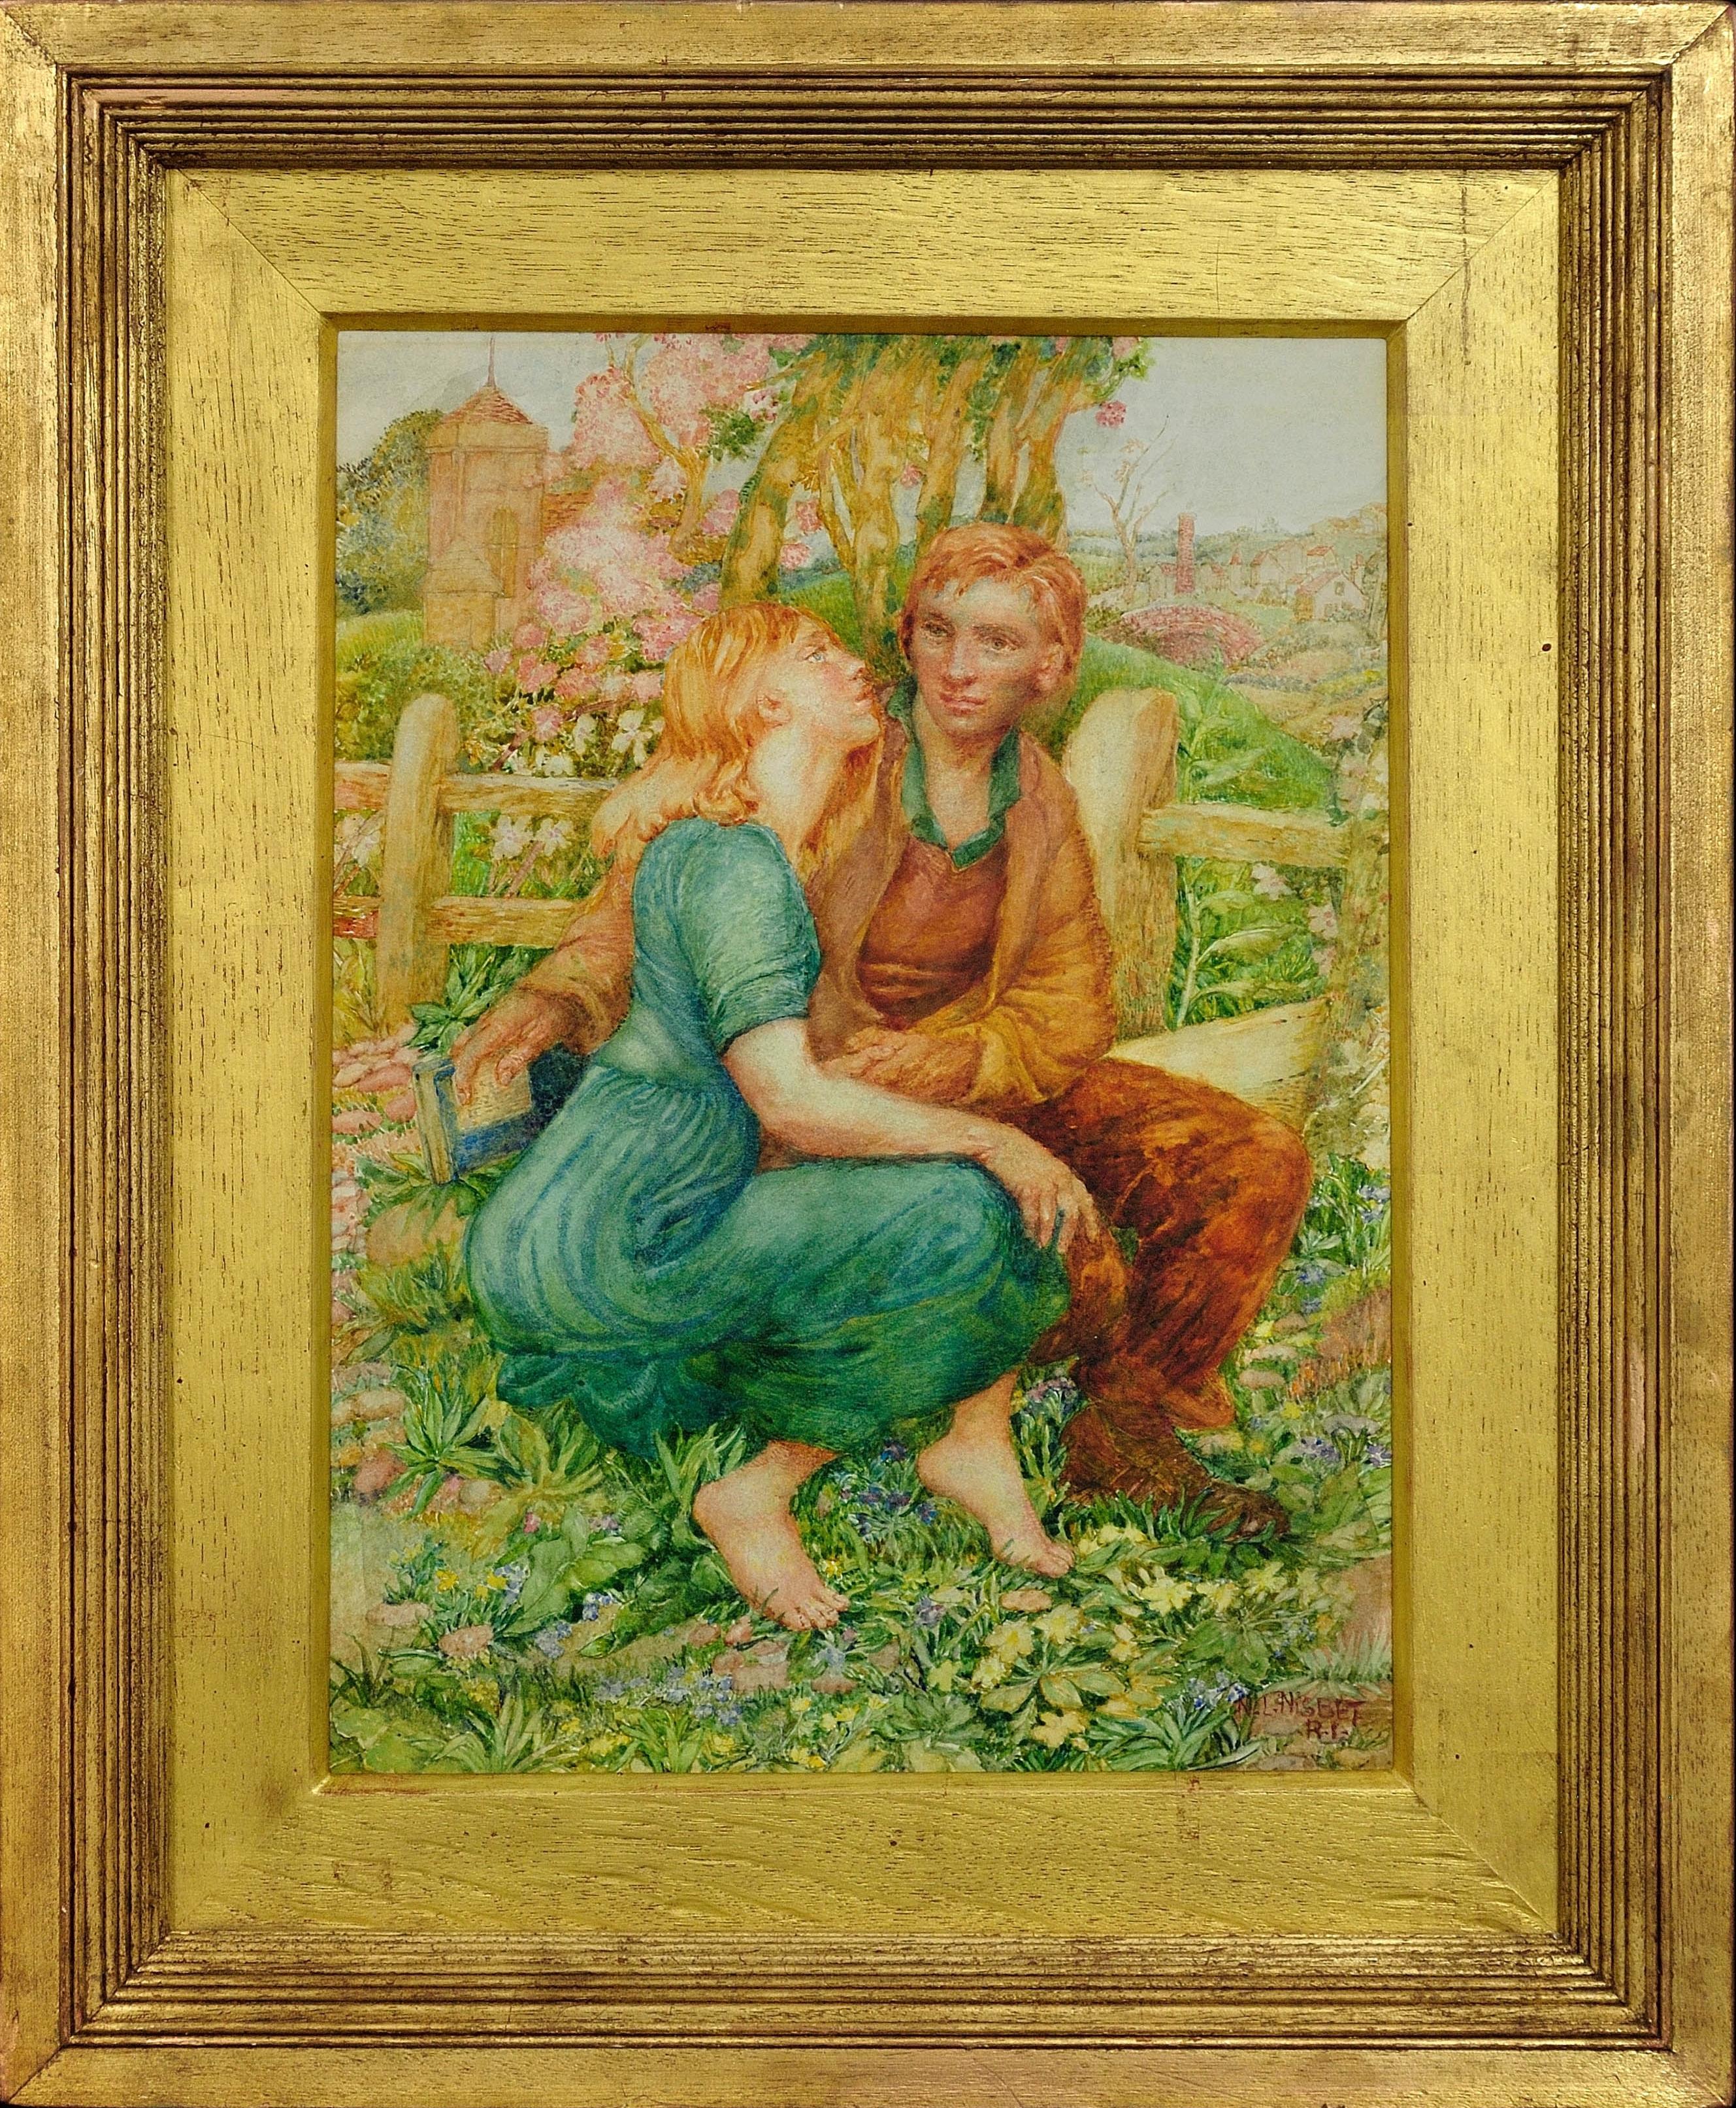 Such Young Love. The Anticipation of a Kiss. Last of the Pre-Raphaelites.